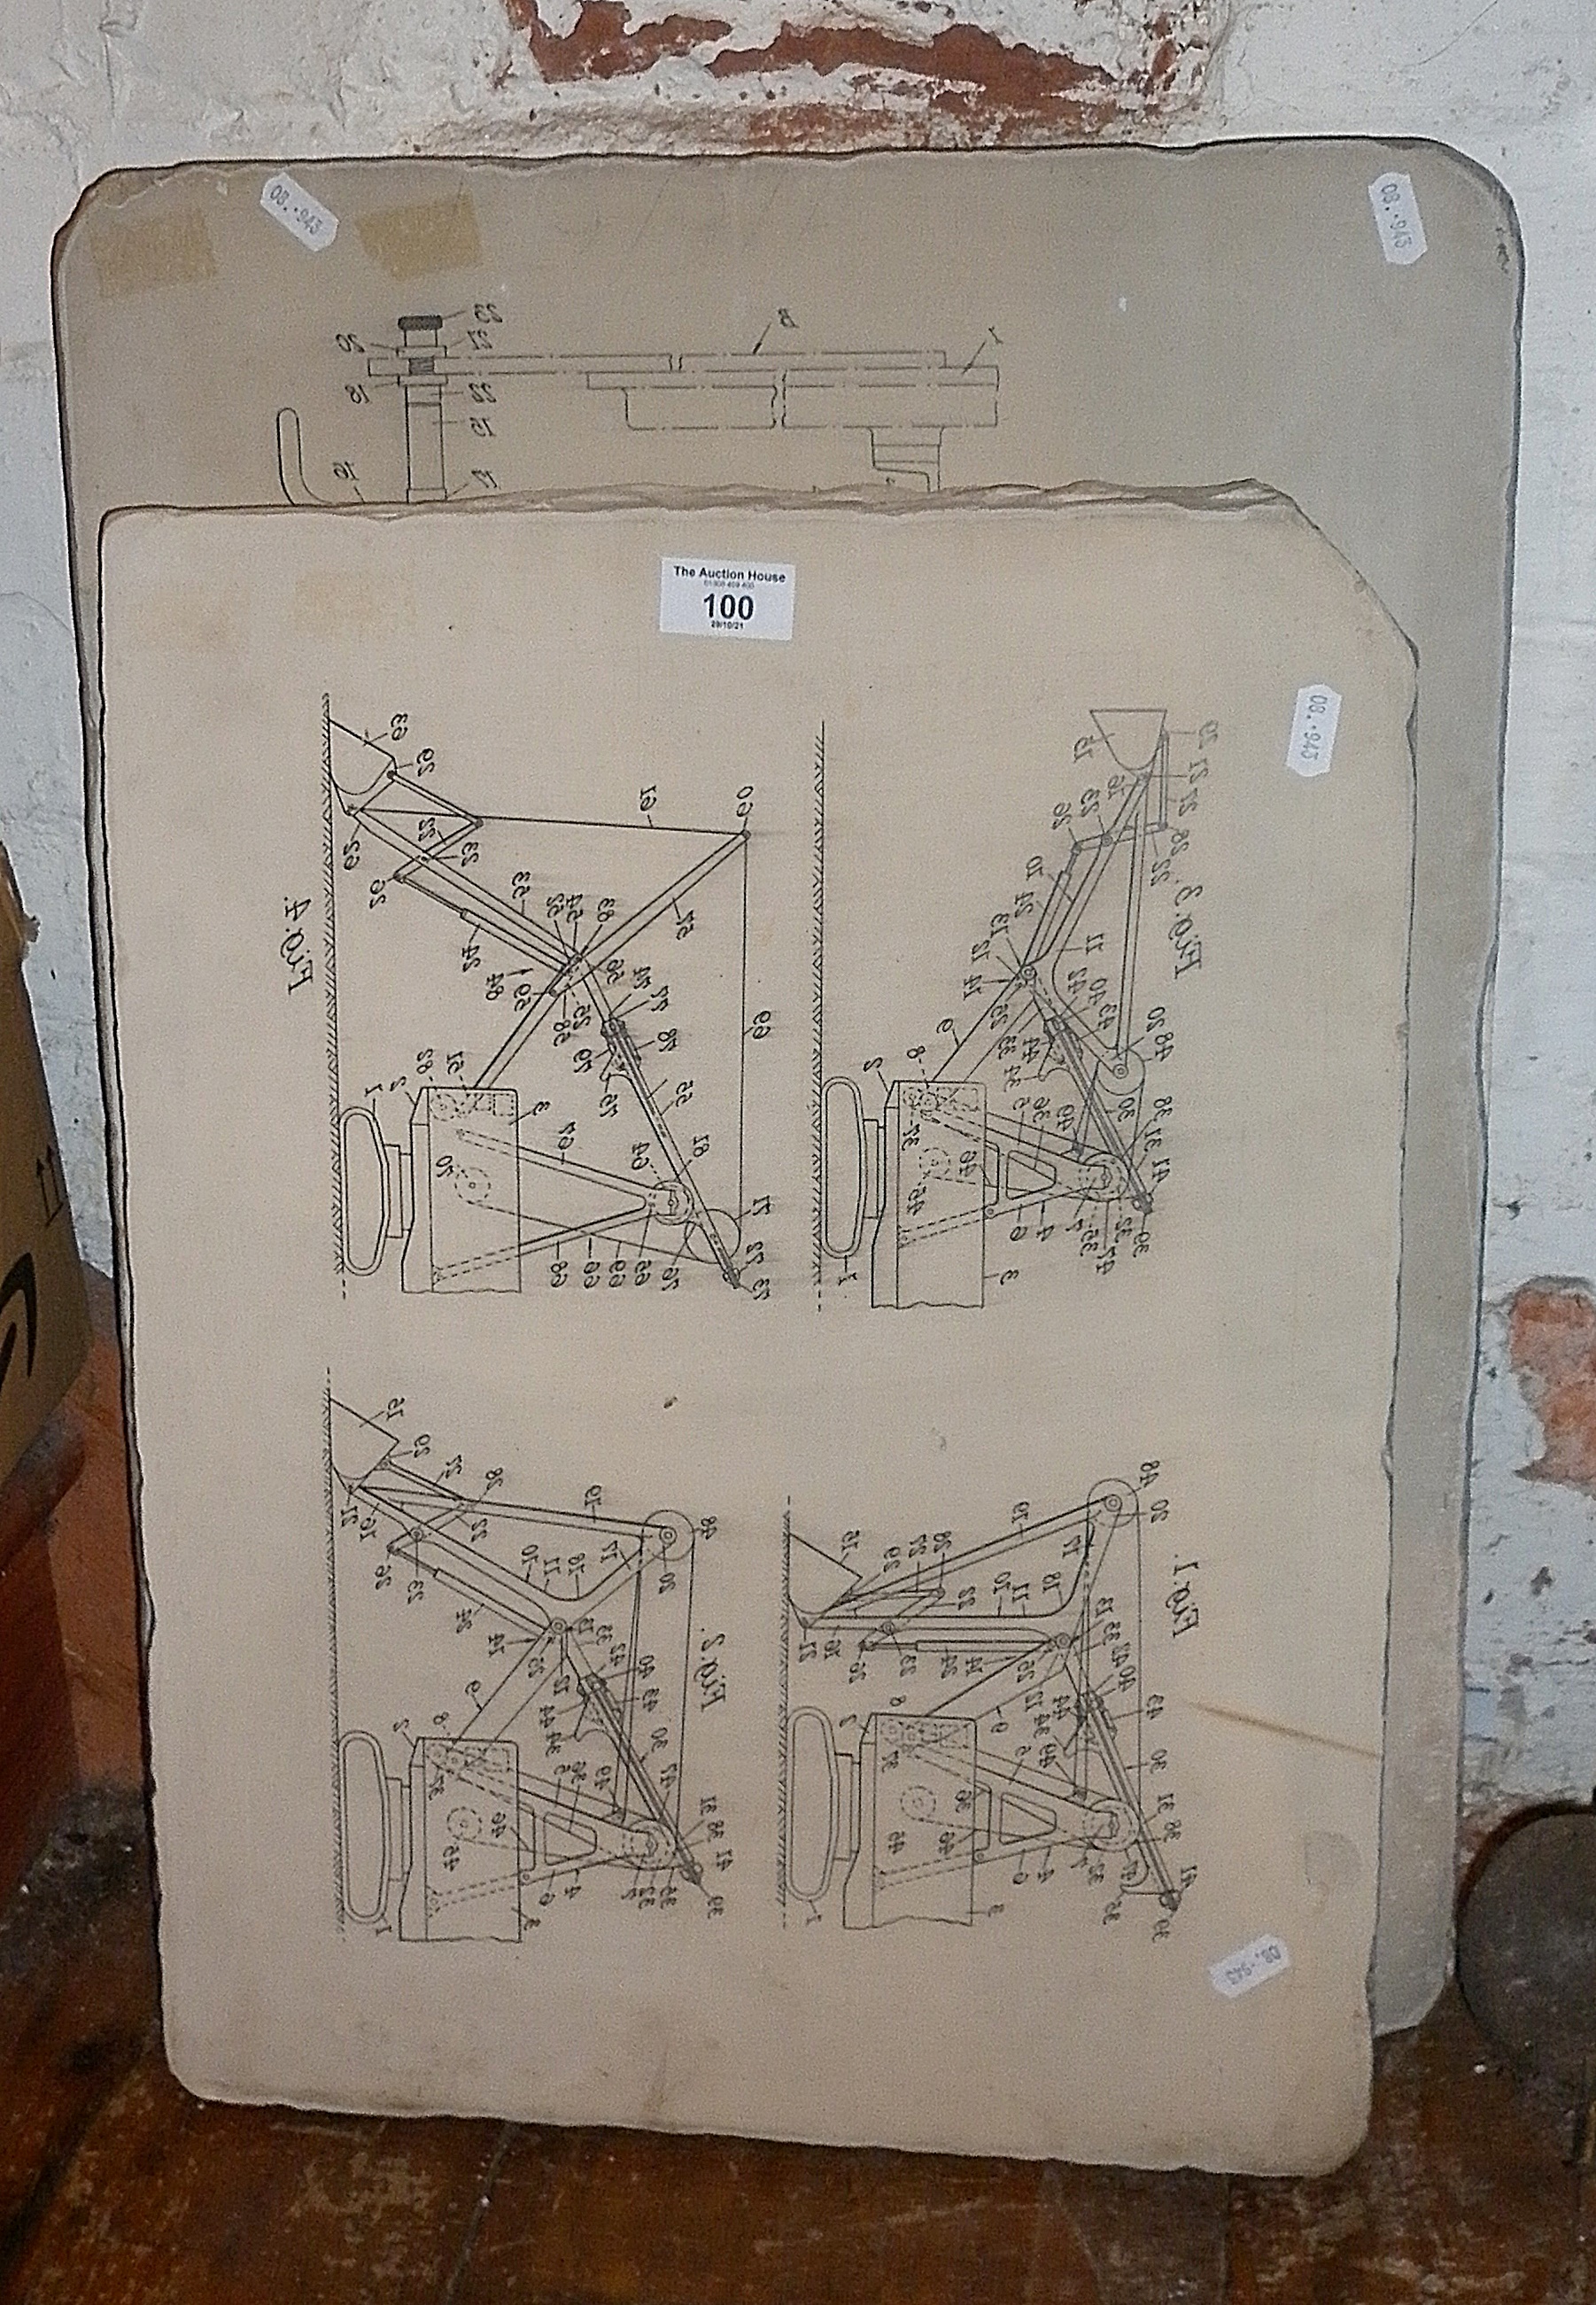 Two large lithographic stones with images of engineers diagrams, one 24" x 17" and the other 20" x